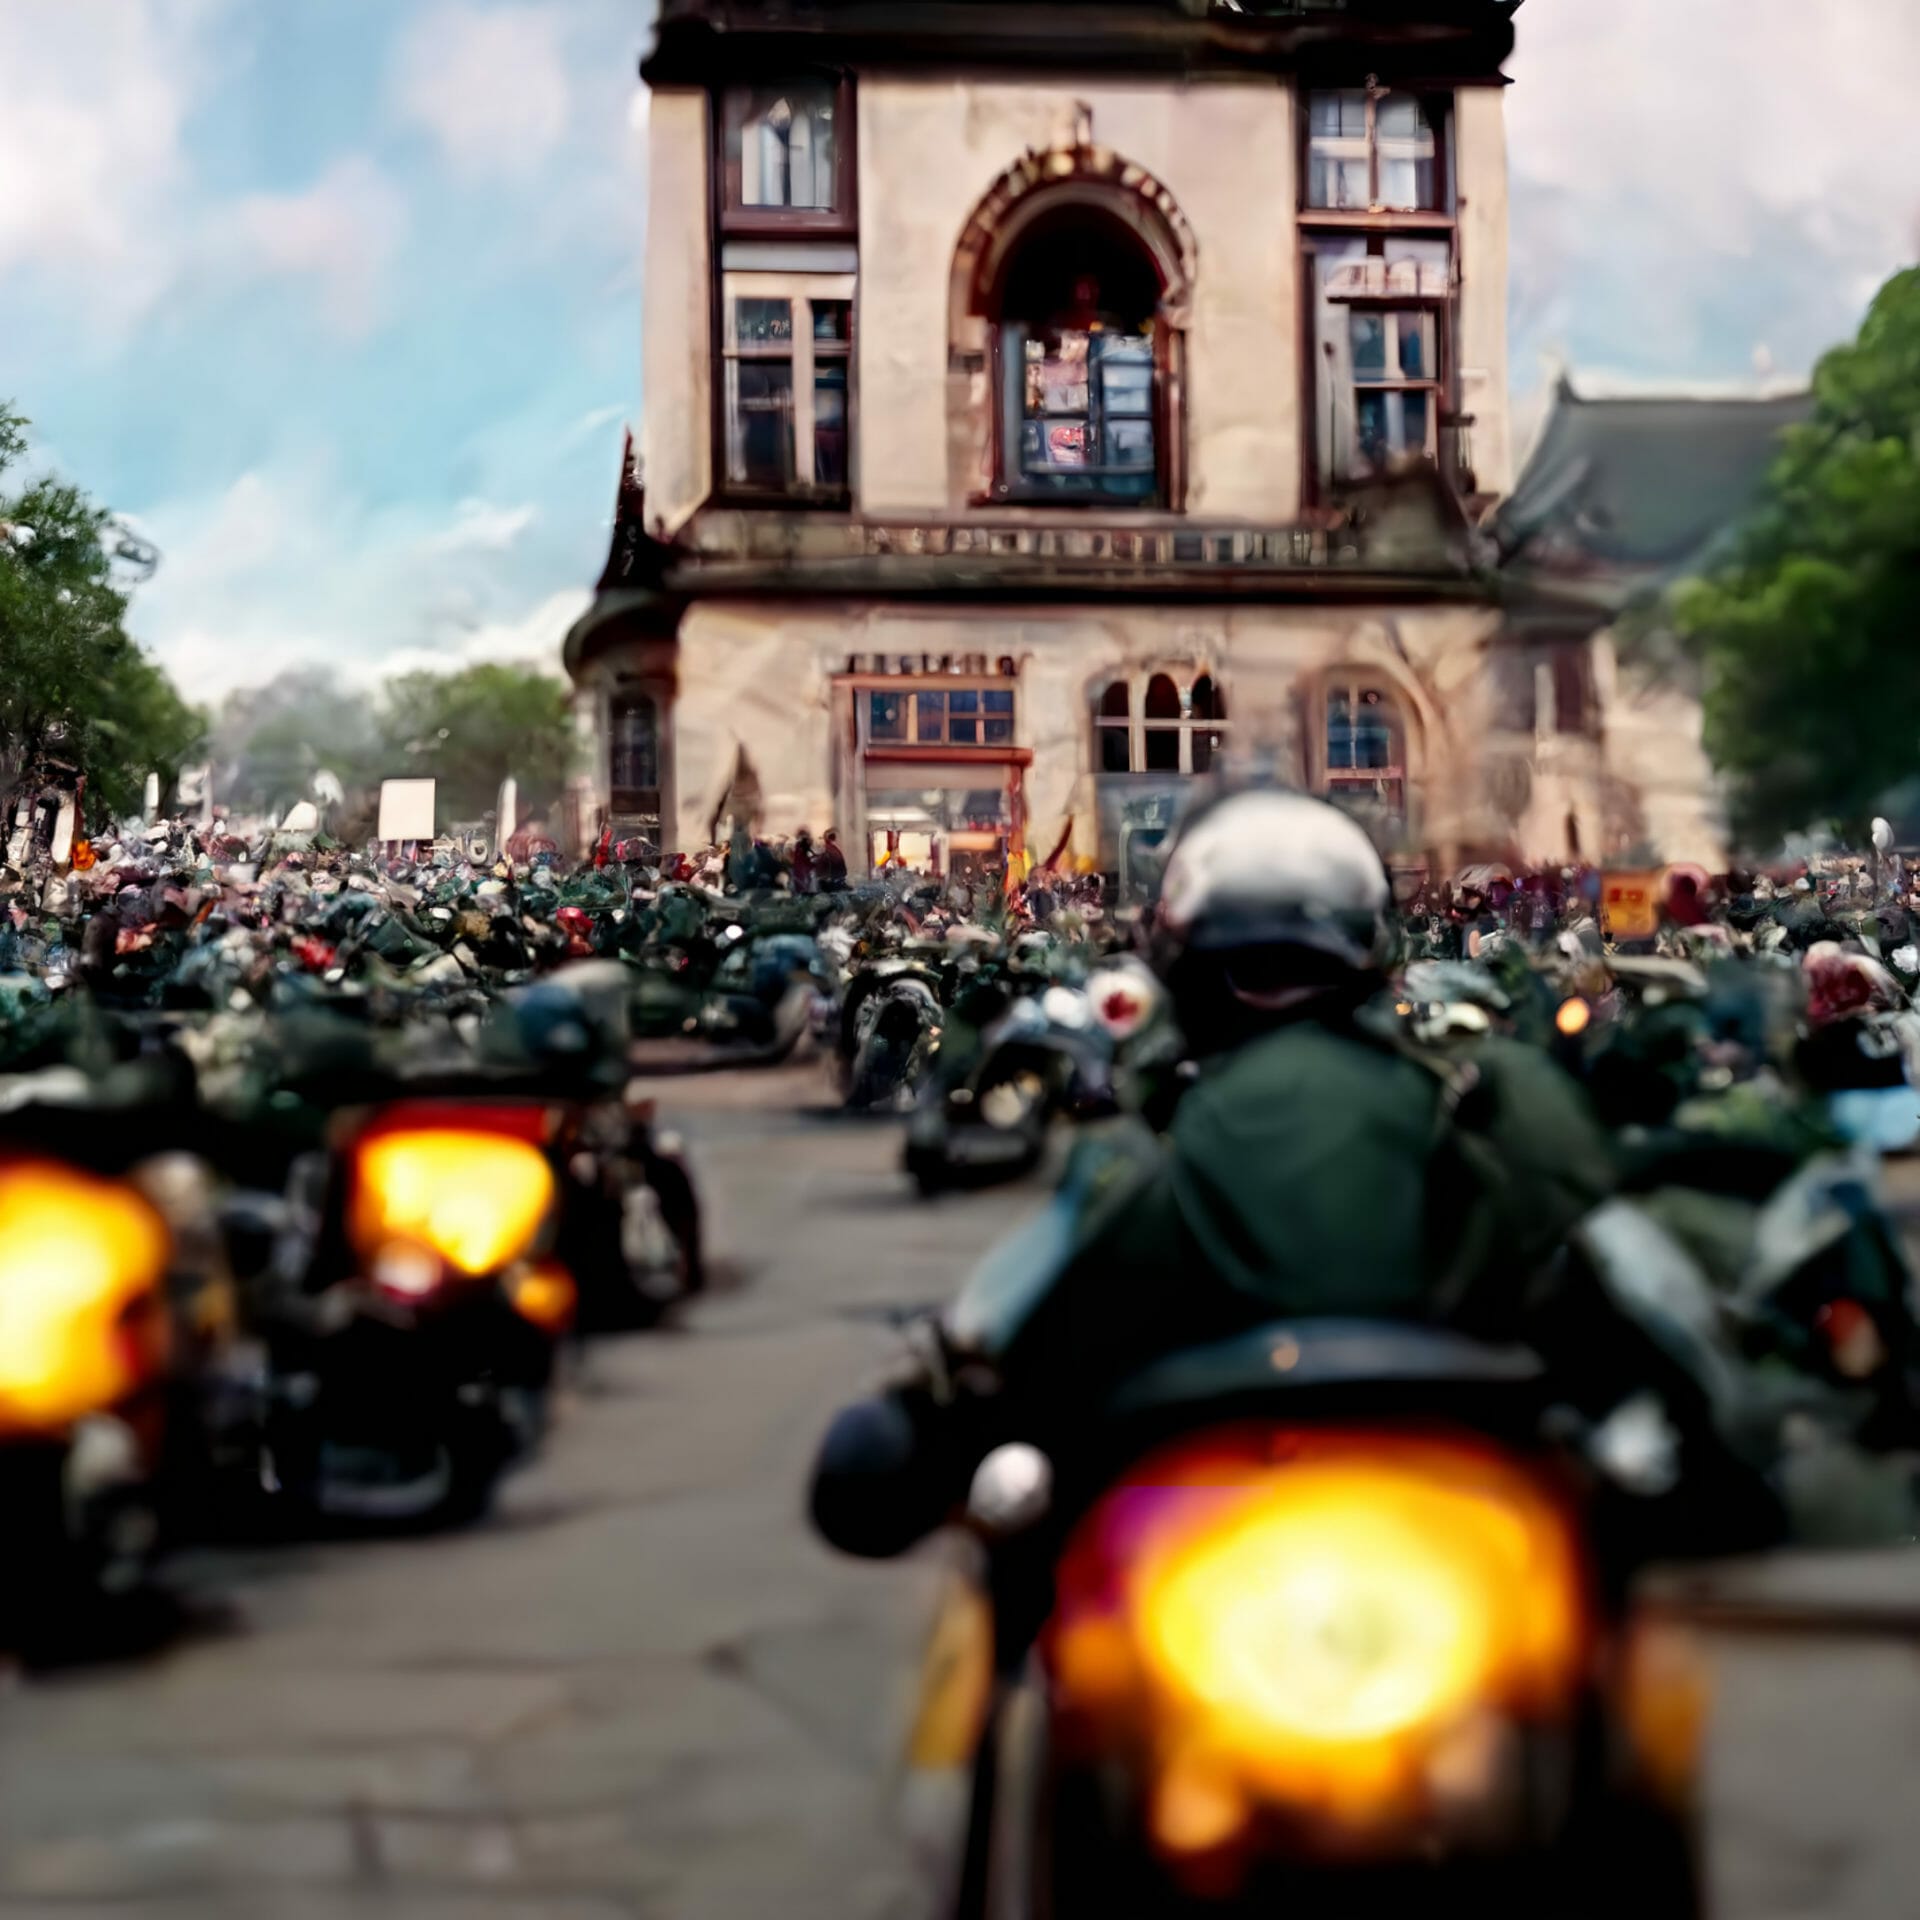 MN Motorcyclists demonstrate peacefully at the town hall square 7ccfd5c3 fe86 4781 93f4 6f3abc2f752b